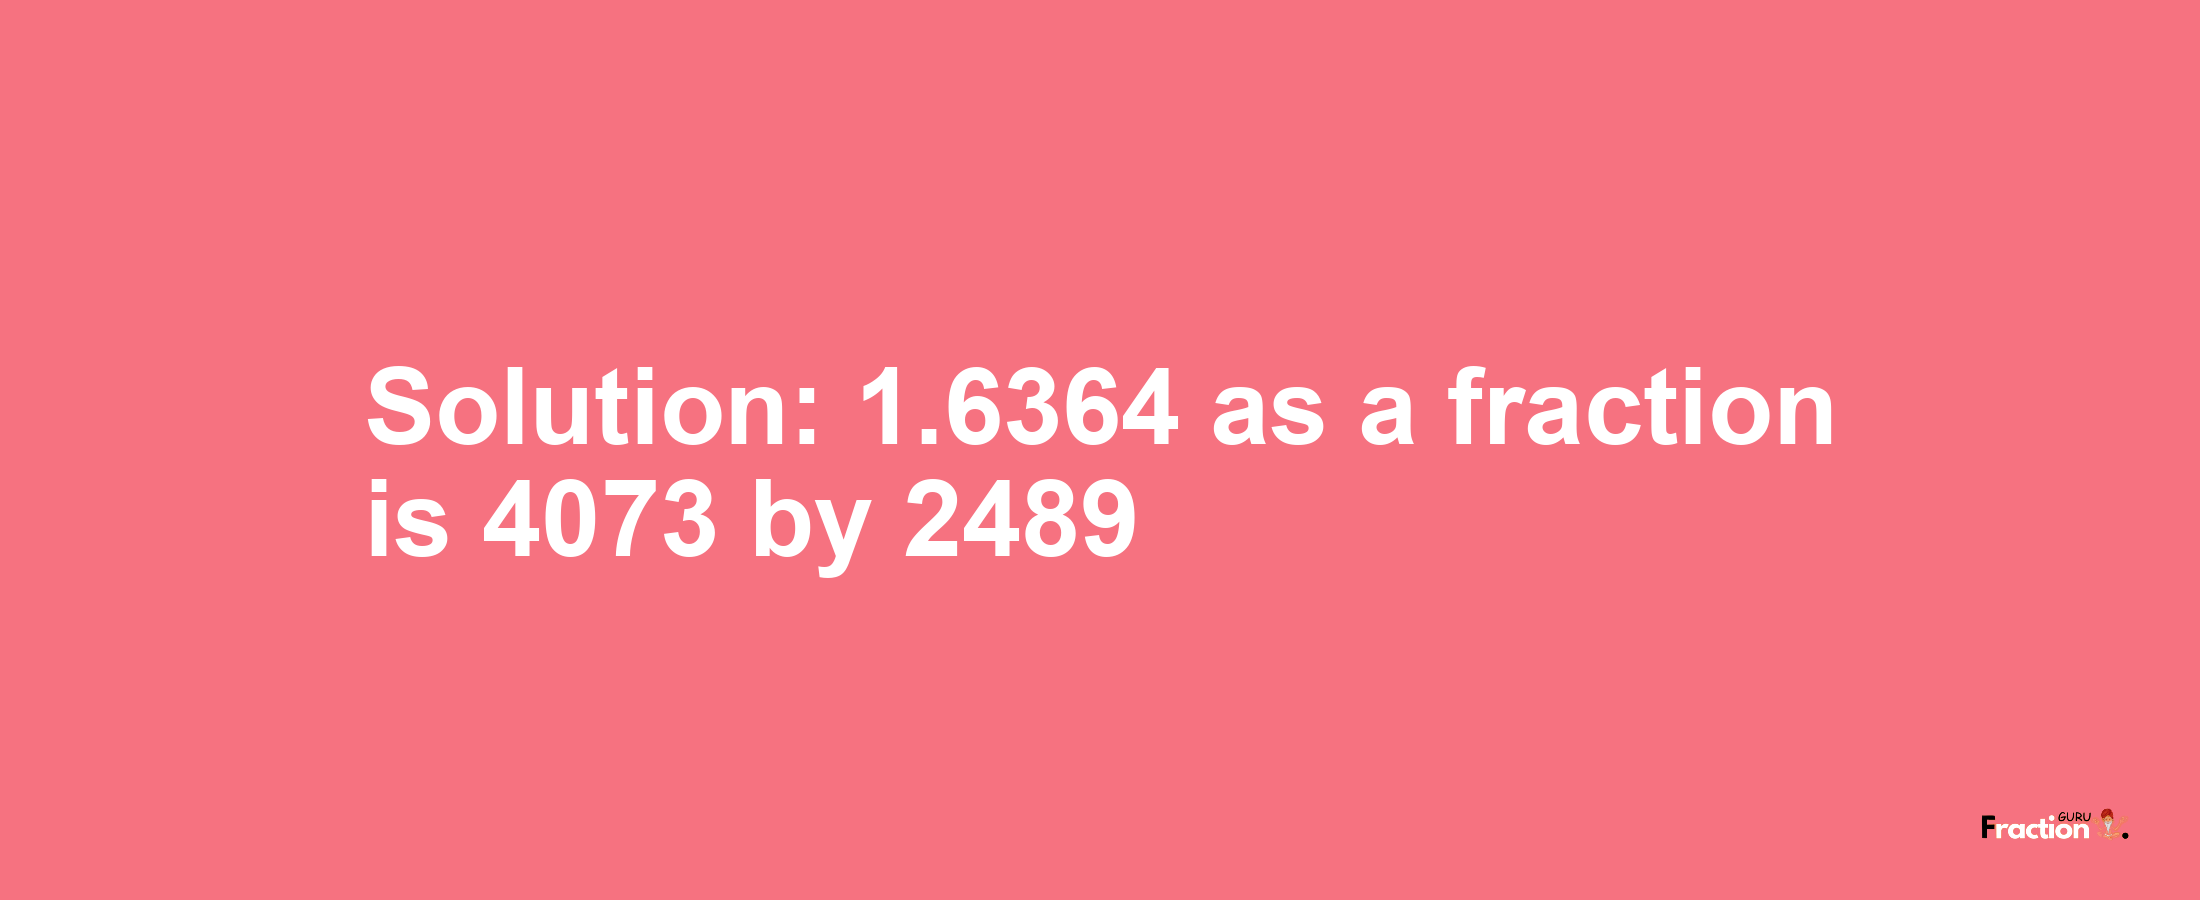 Solution:1.6364 as a fraction is 4073/2489